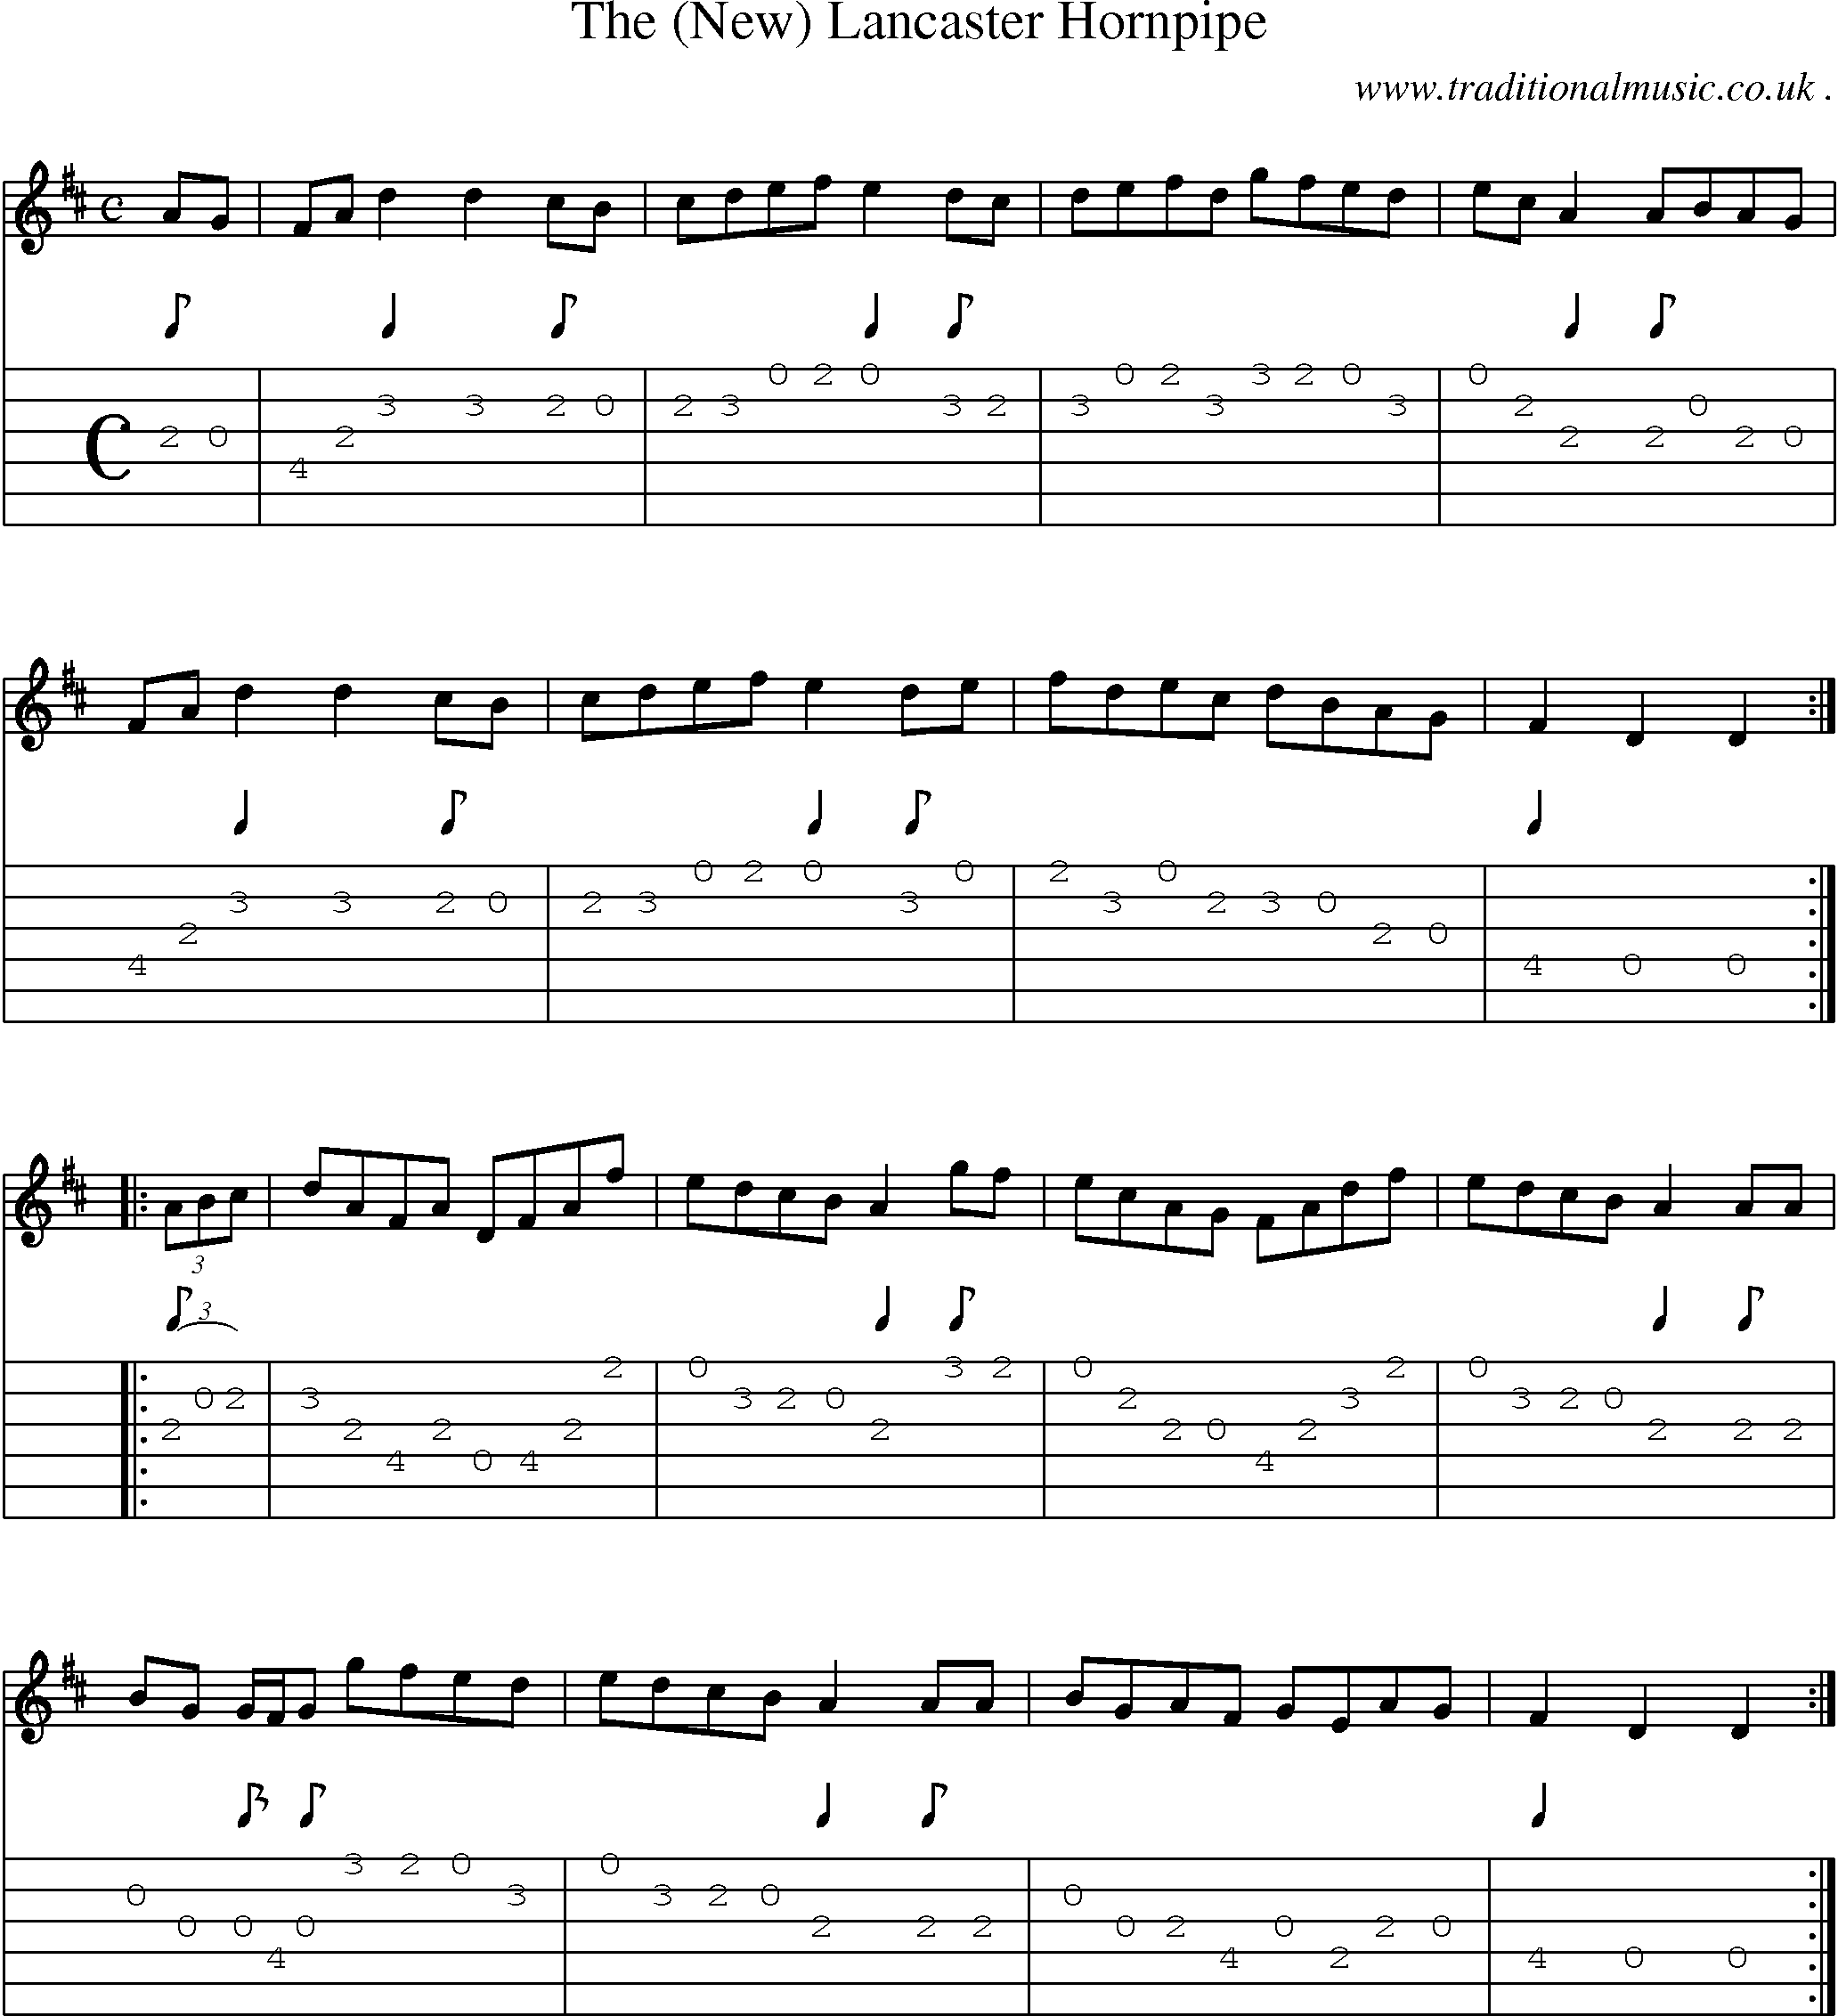 Sheet-Music and Guitar Tabs for The (new) Lancaster Hornpipe